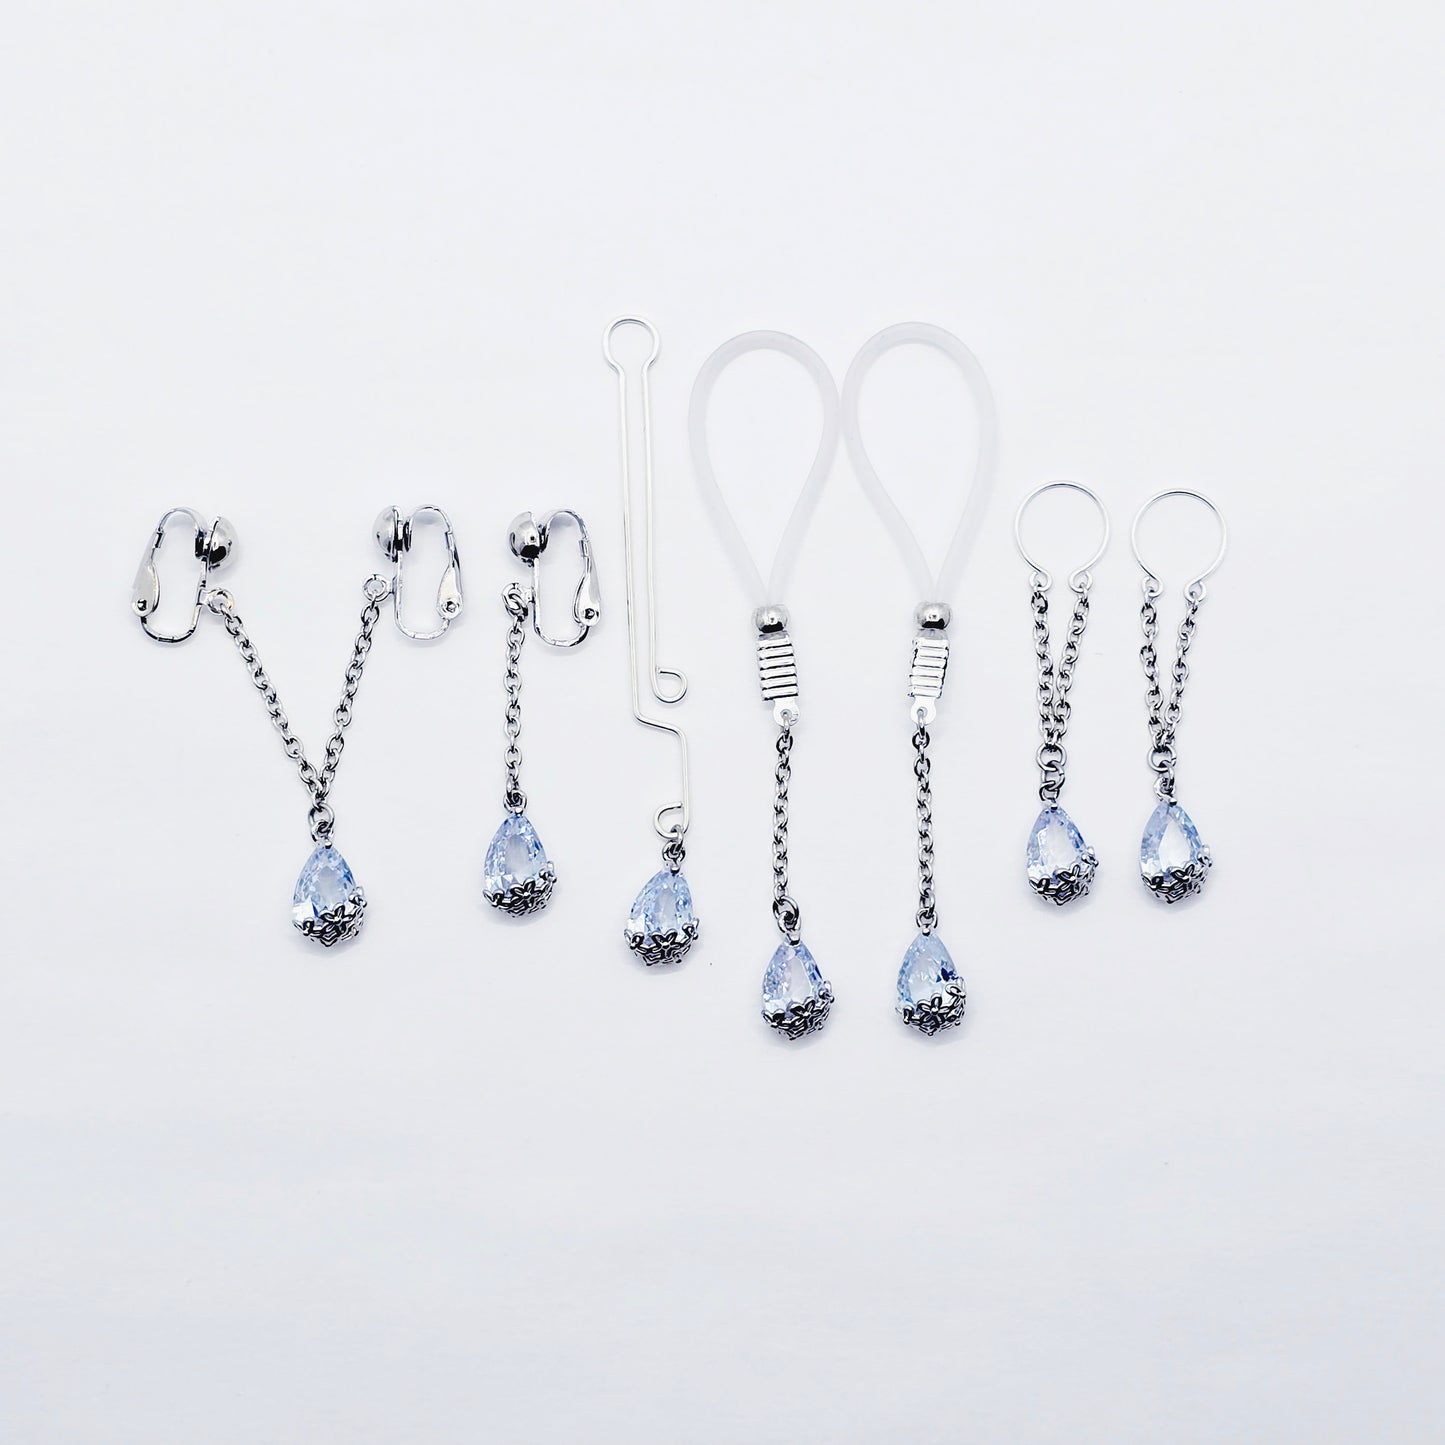 Complete Blue Cubic Zirconia Intimate Jewelry Set for Women